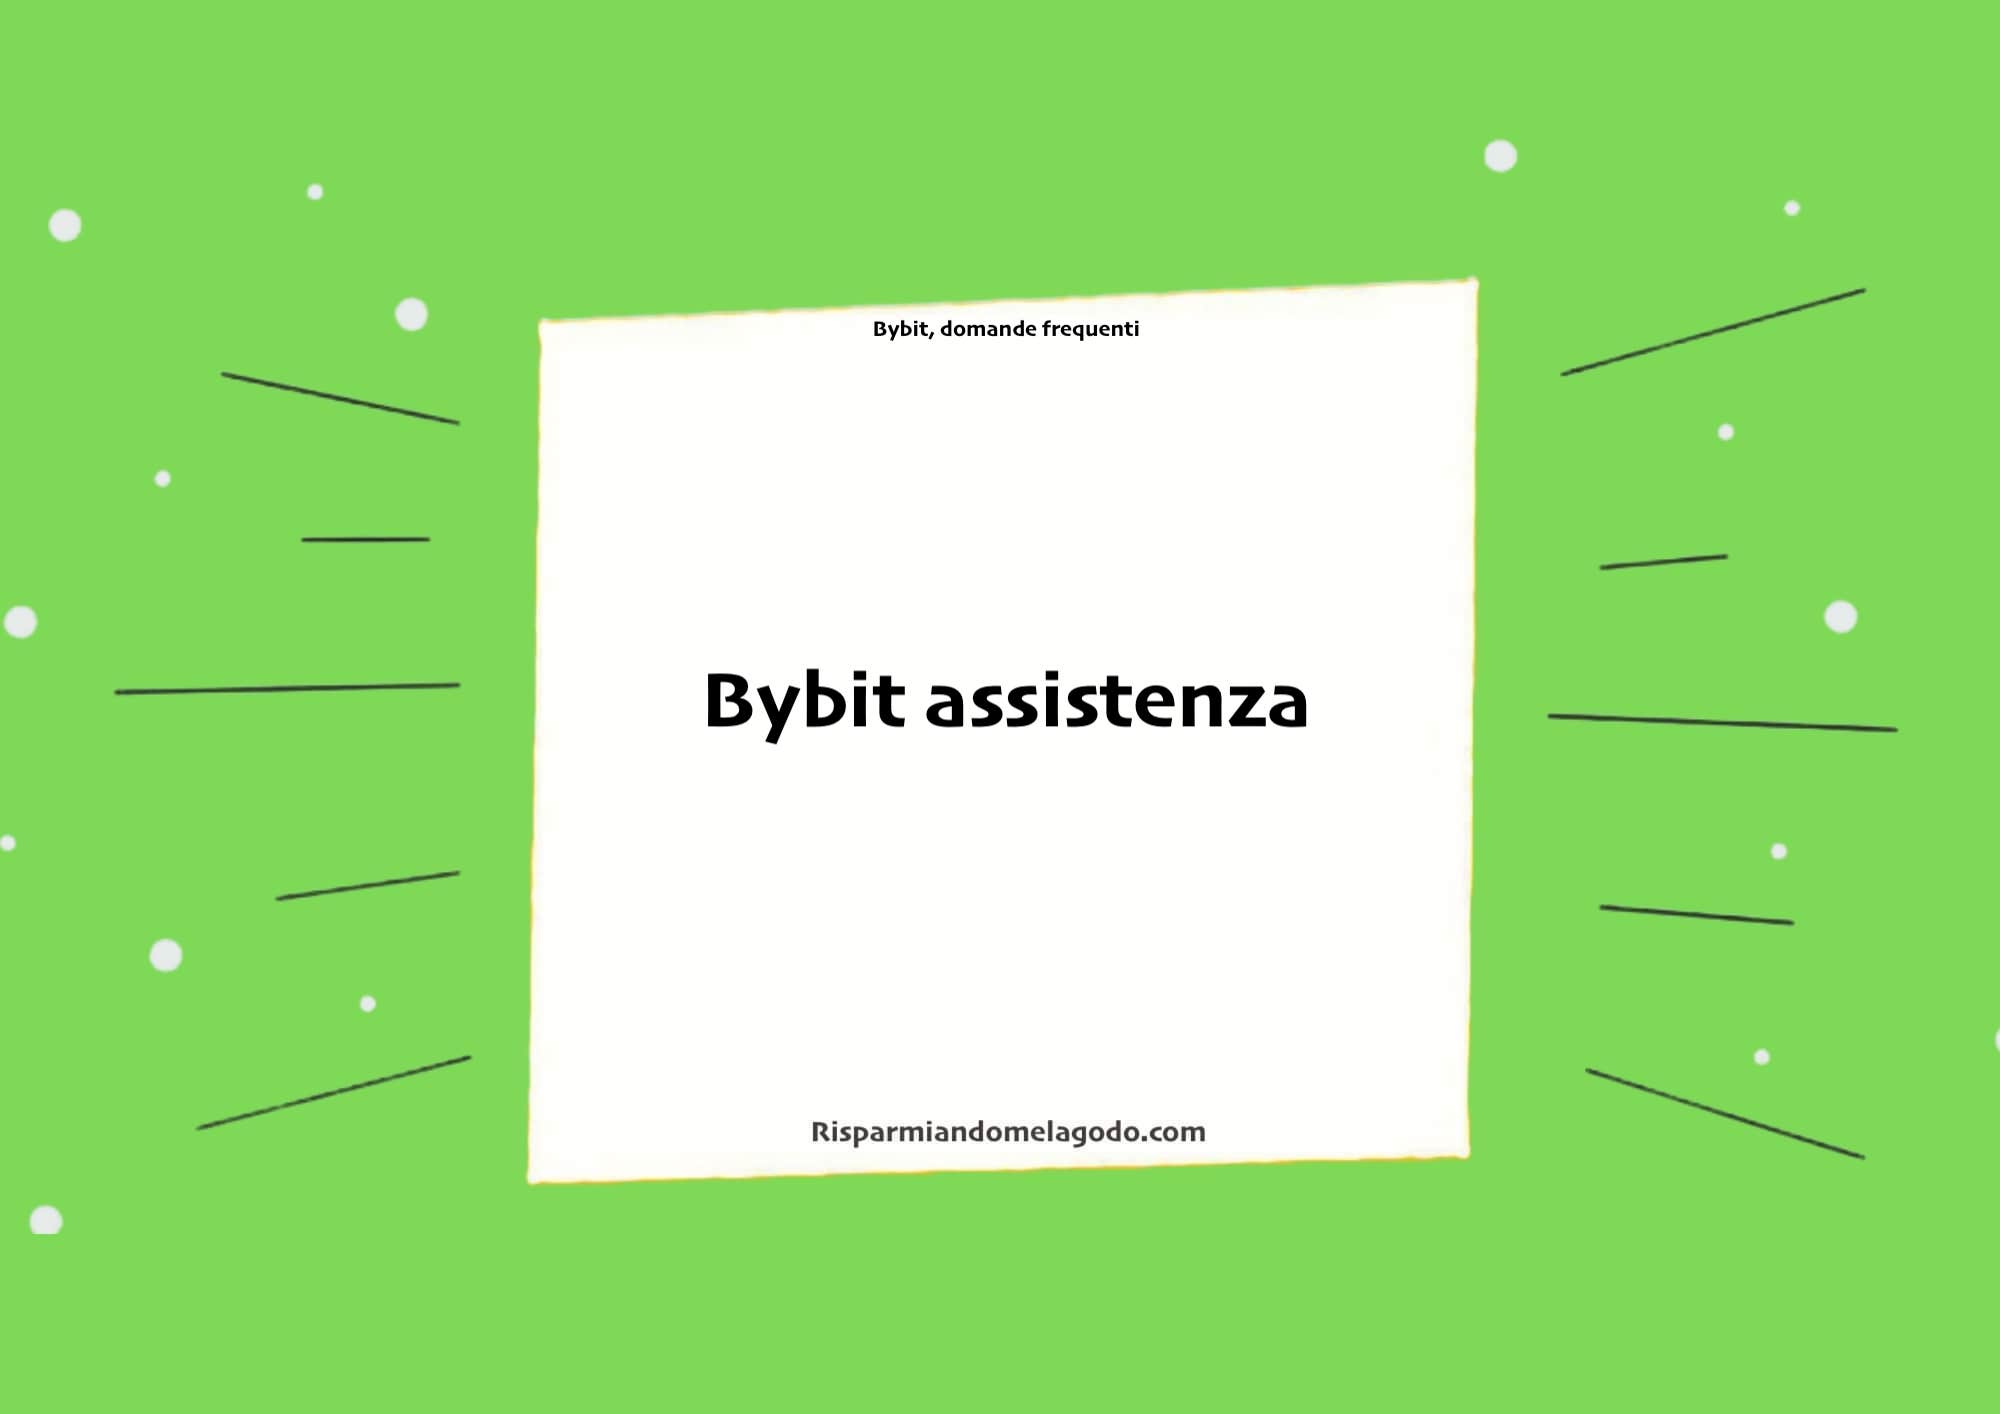 Bybit assistenza